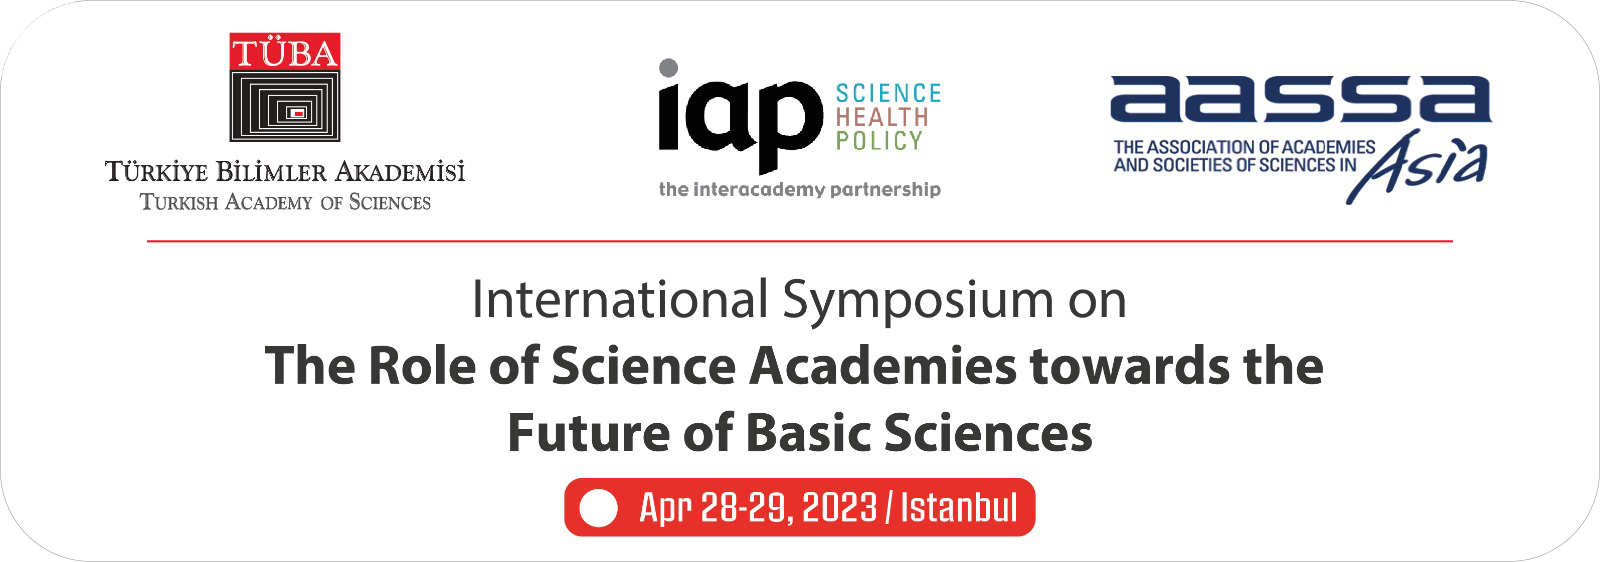 International Symposium on The Role of Science Academies towards the Future of Basic Sciences